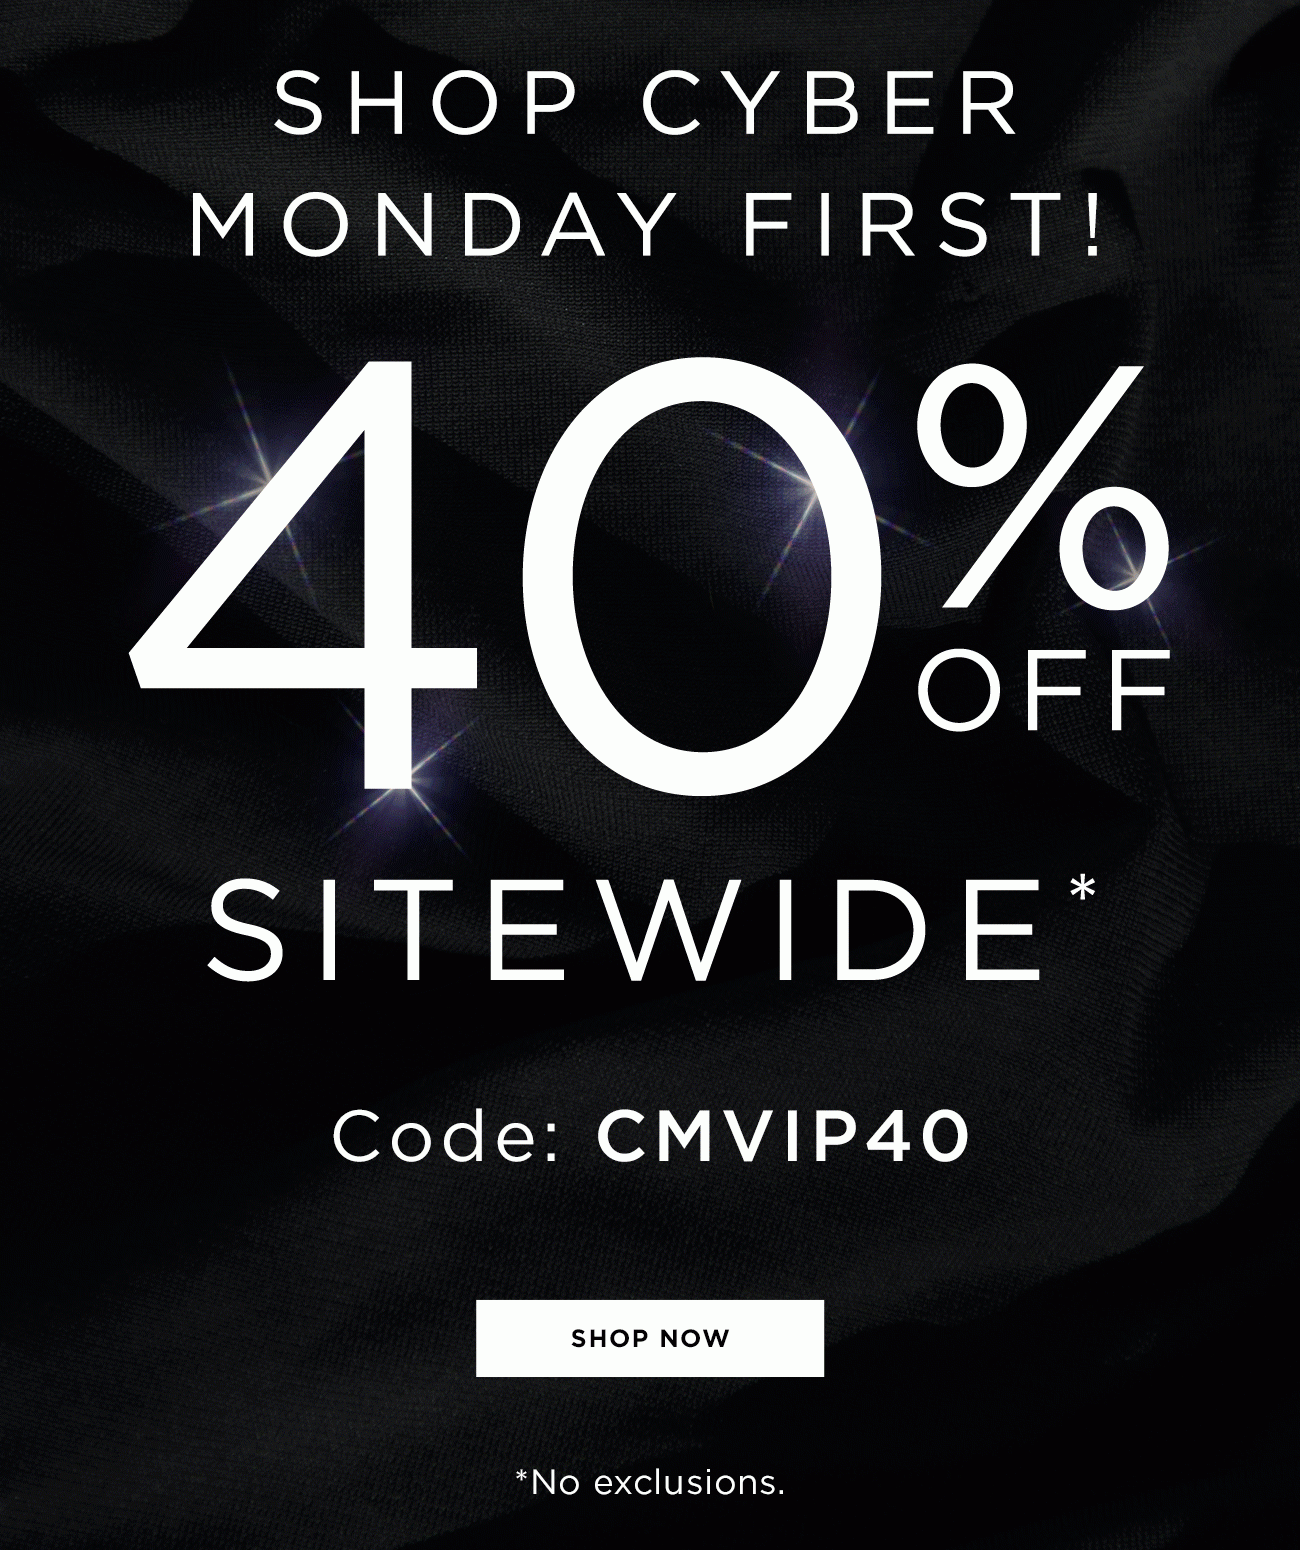 Shop Cyber Monday First! 40% Off Sitewide | Code: CMVIP40